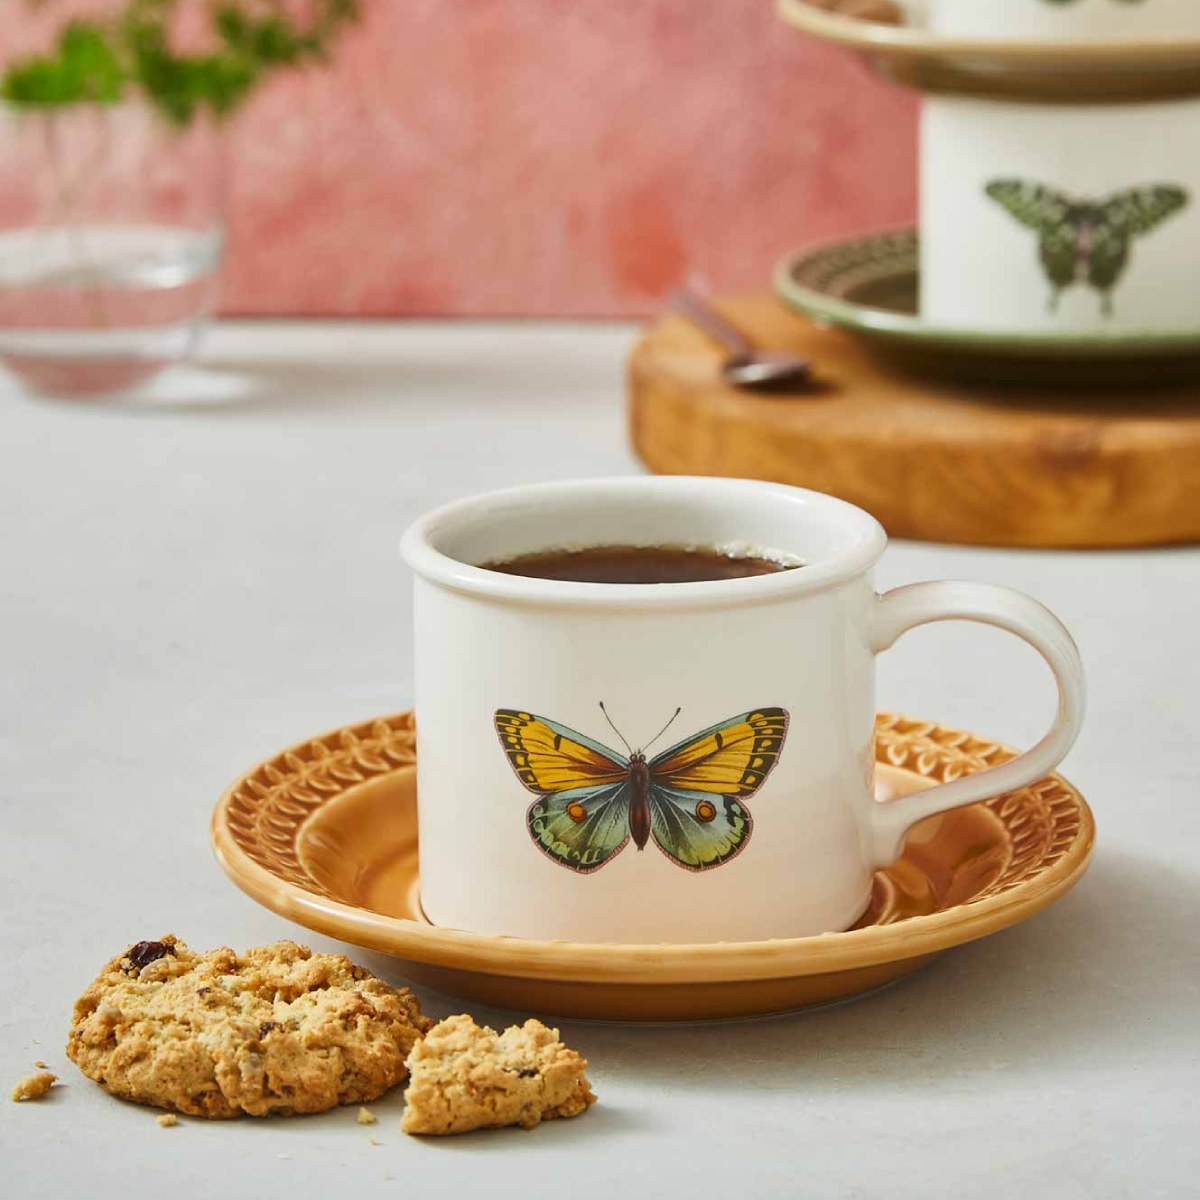 Aspen Cappuccino Cup with Saucer + Reviews